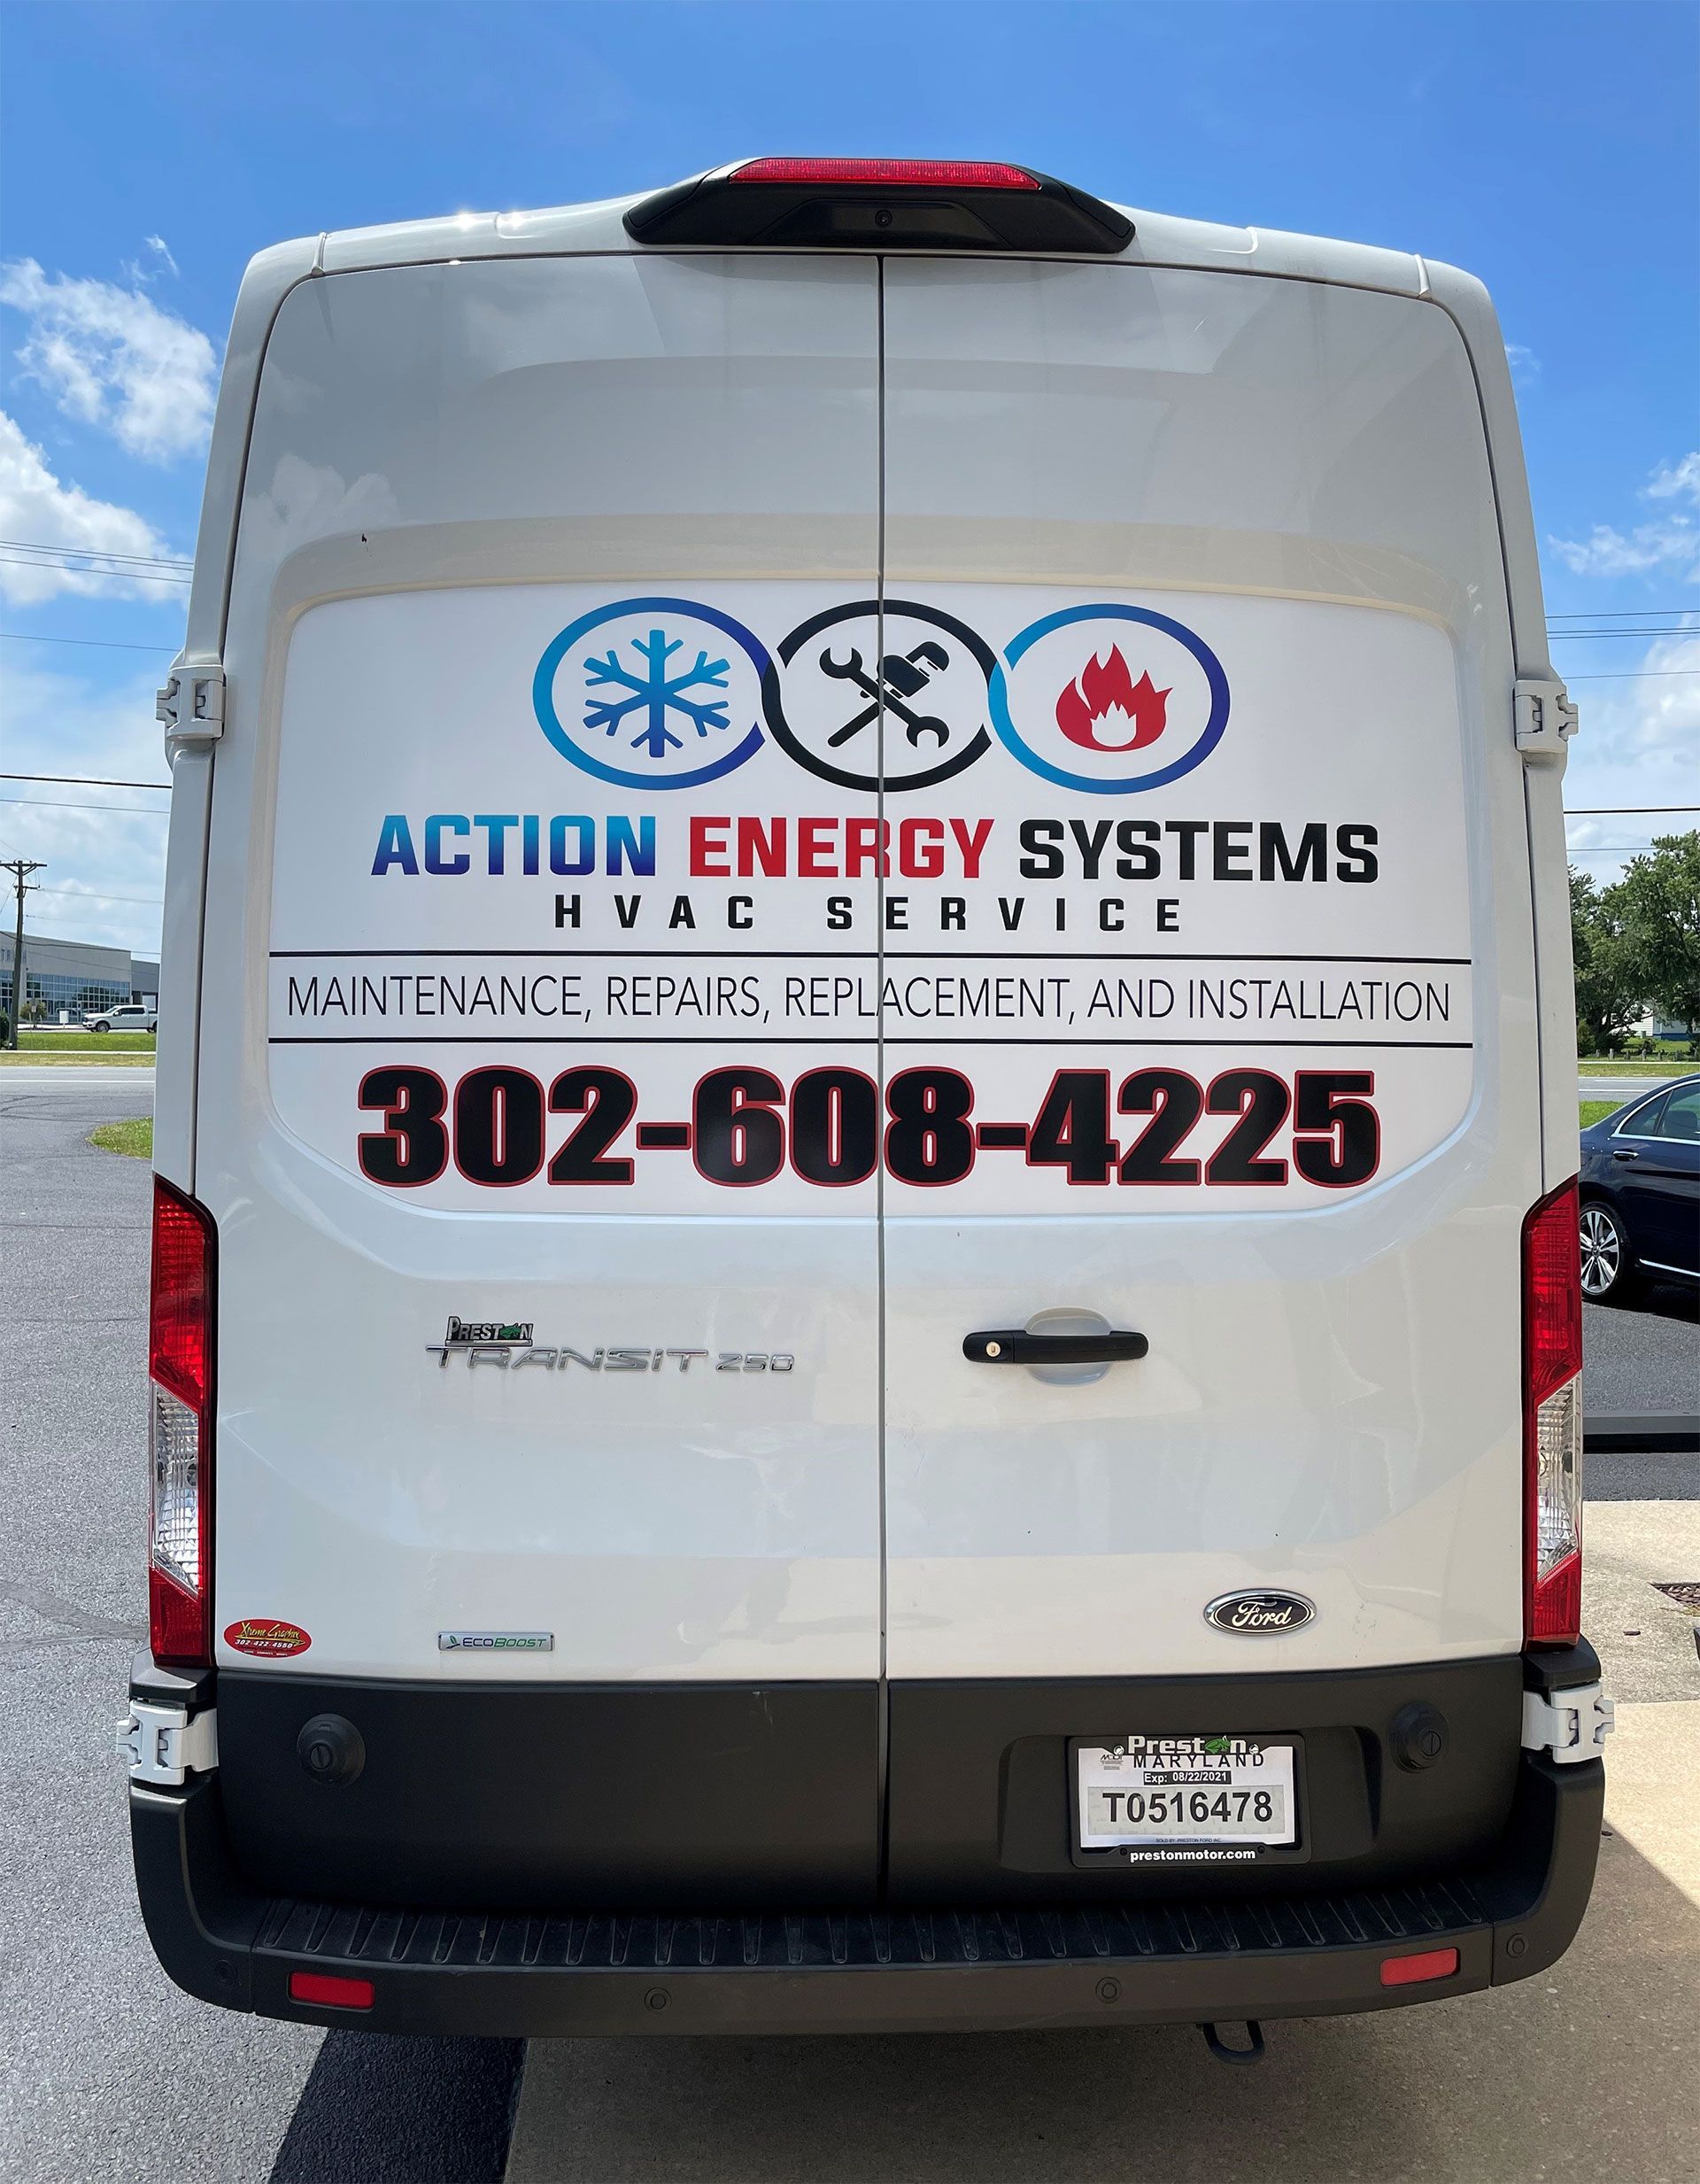 Action Energy Systems service truck